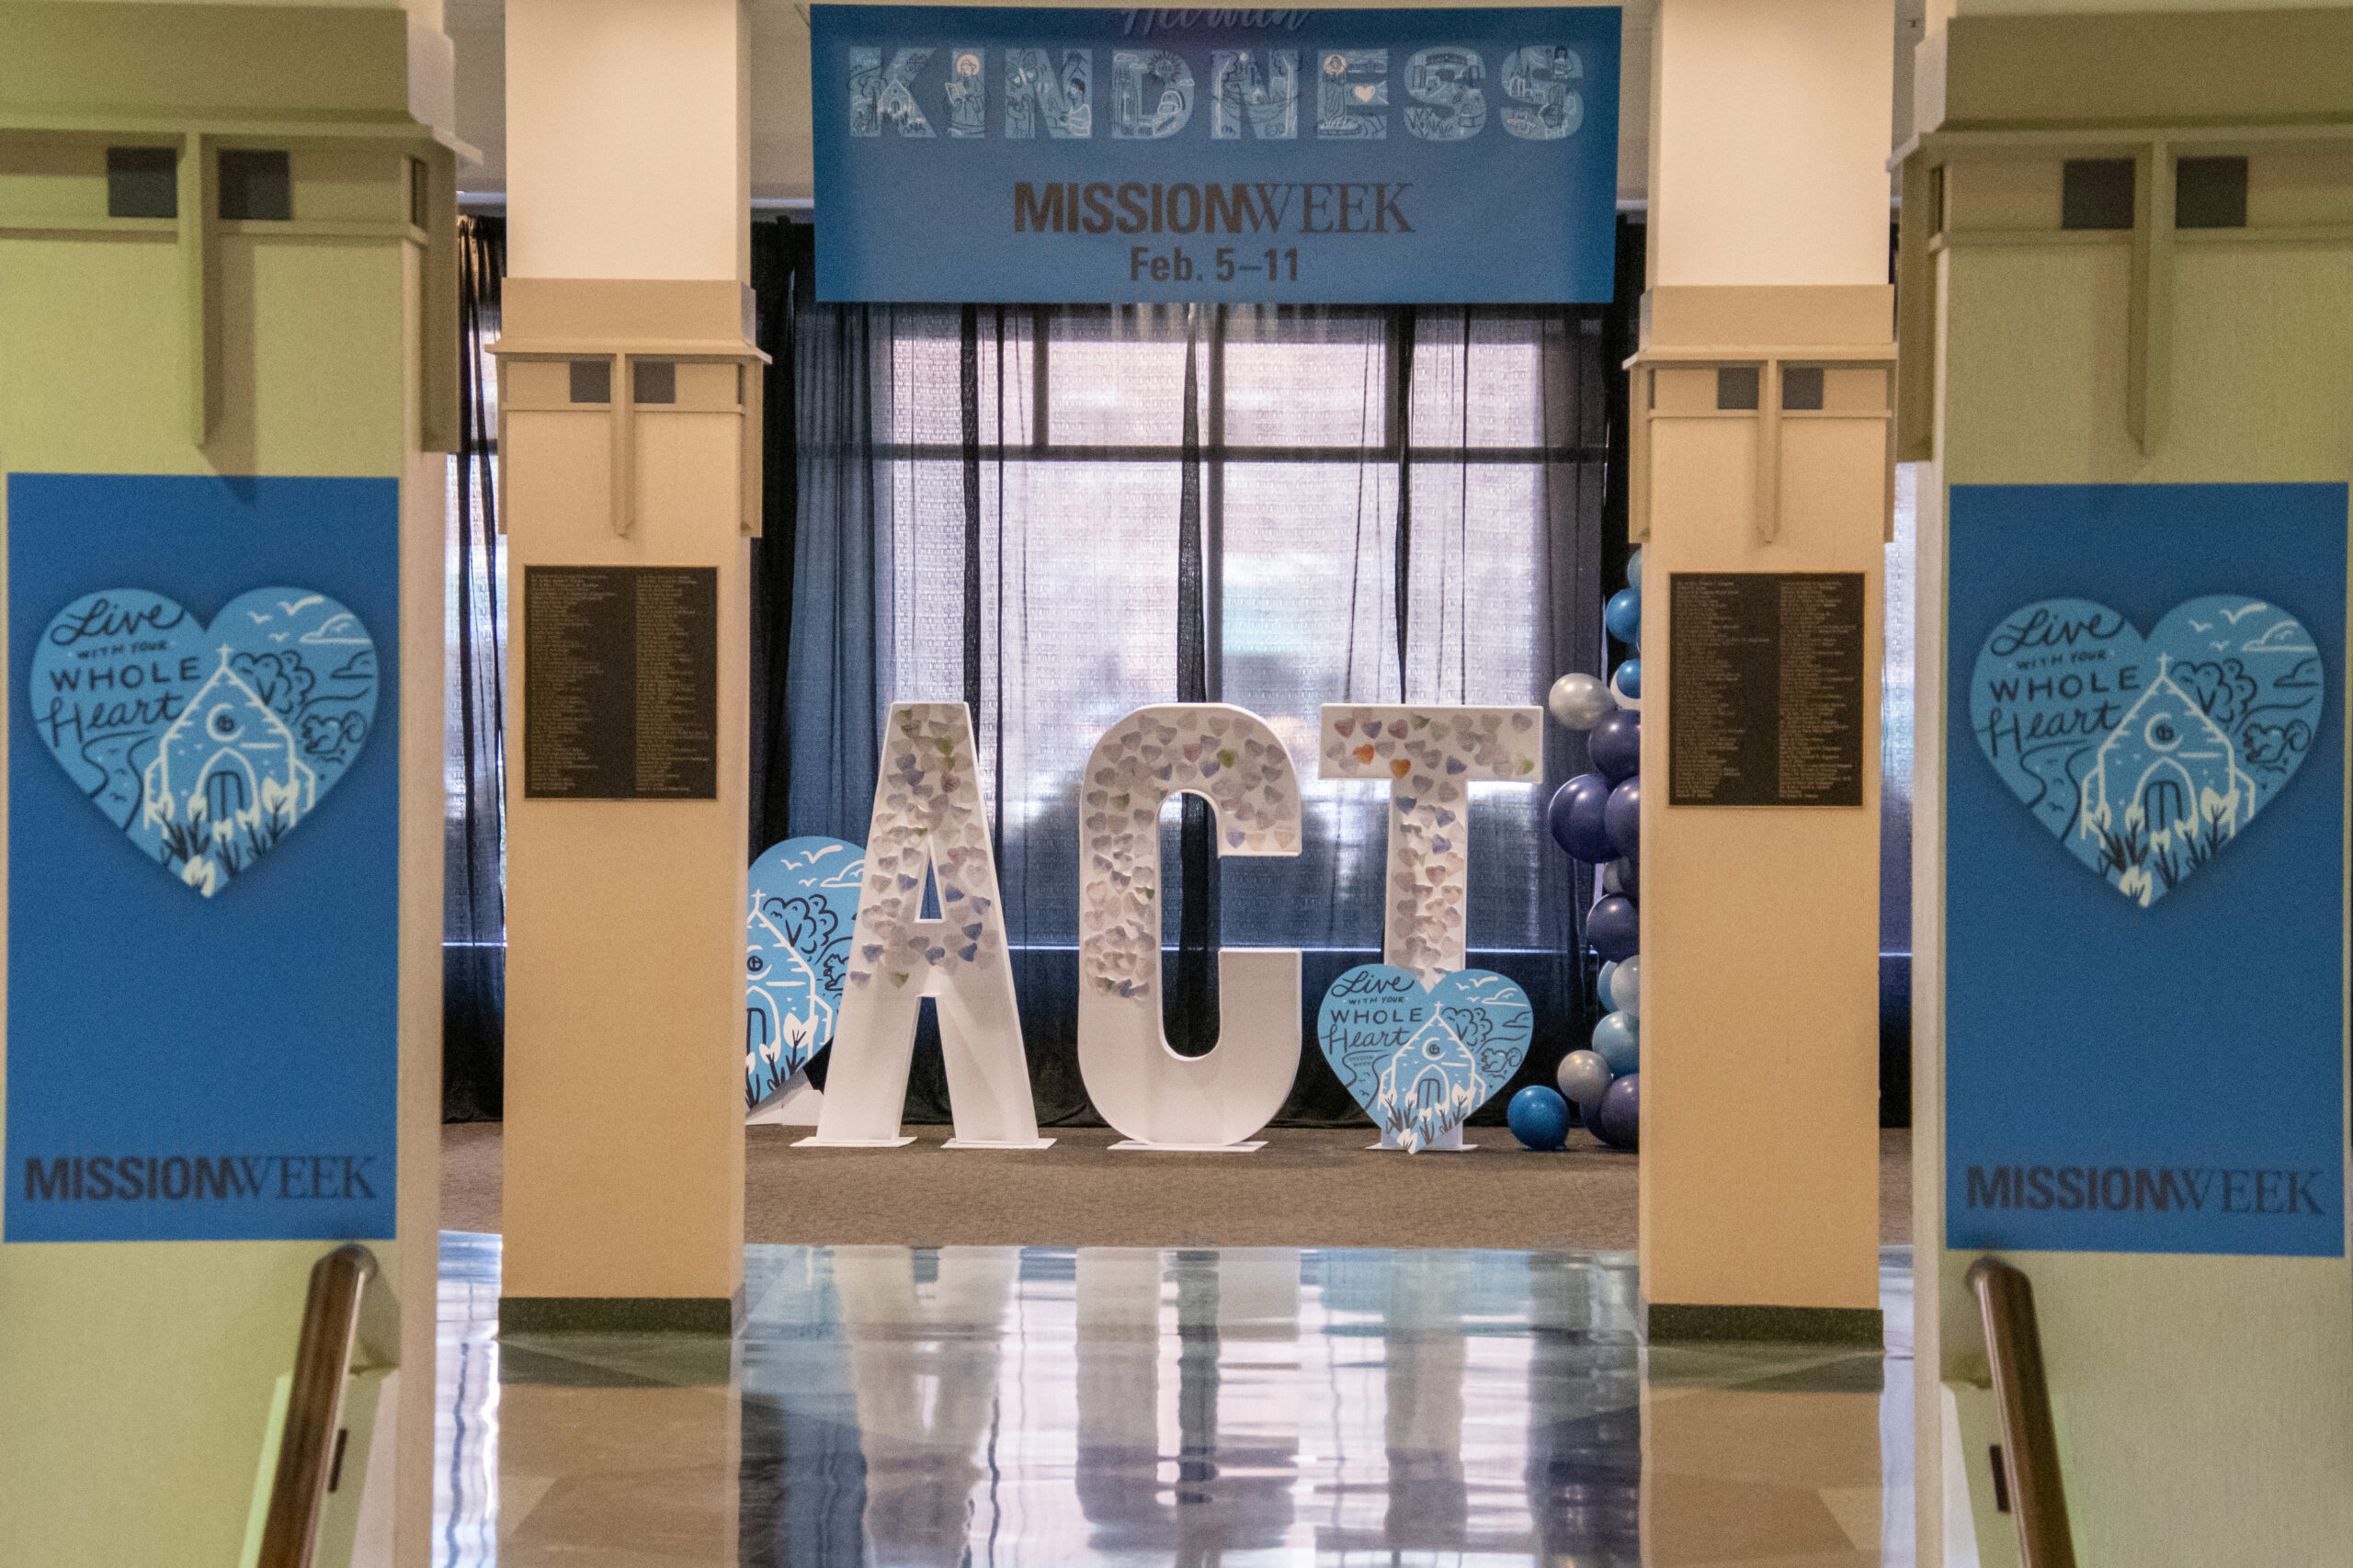 The Mission Week theme displayed in the Rotunda.